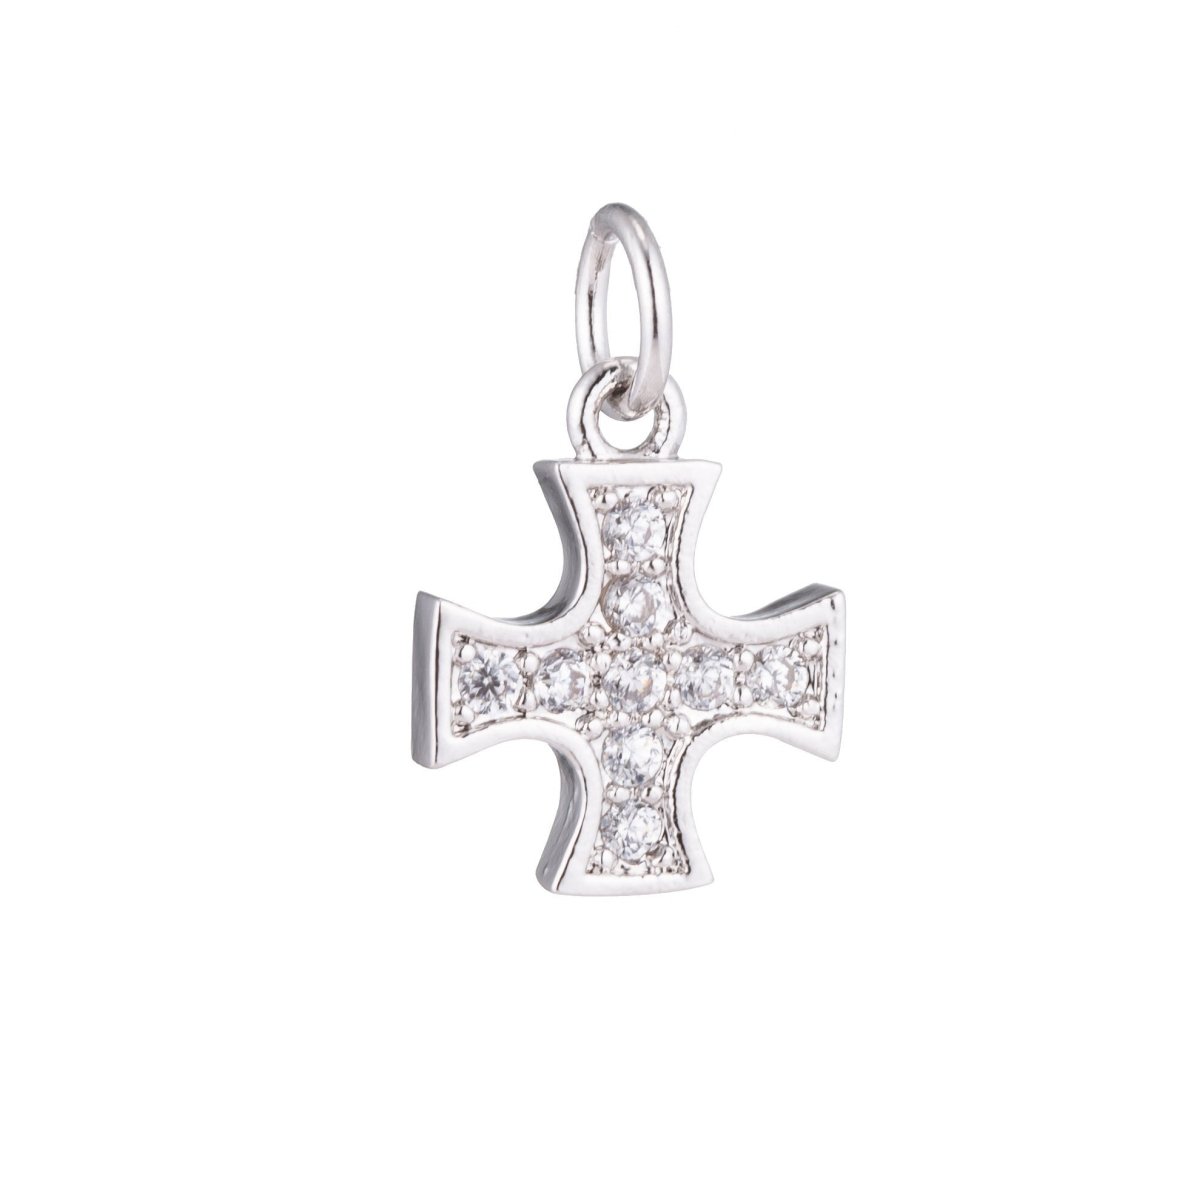 1pc White Gold Filled Cross, Jesus, Religious Gift, Peace Love, Cubic Zirconia Bracelet Charm, Necklace Pendant, Findings for Jewelry Making, CL-CHGF-238/C-209 - DLUXCA